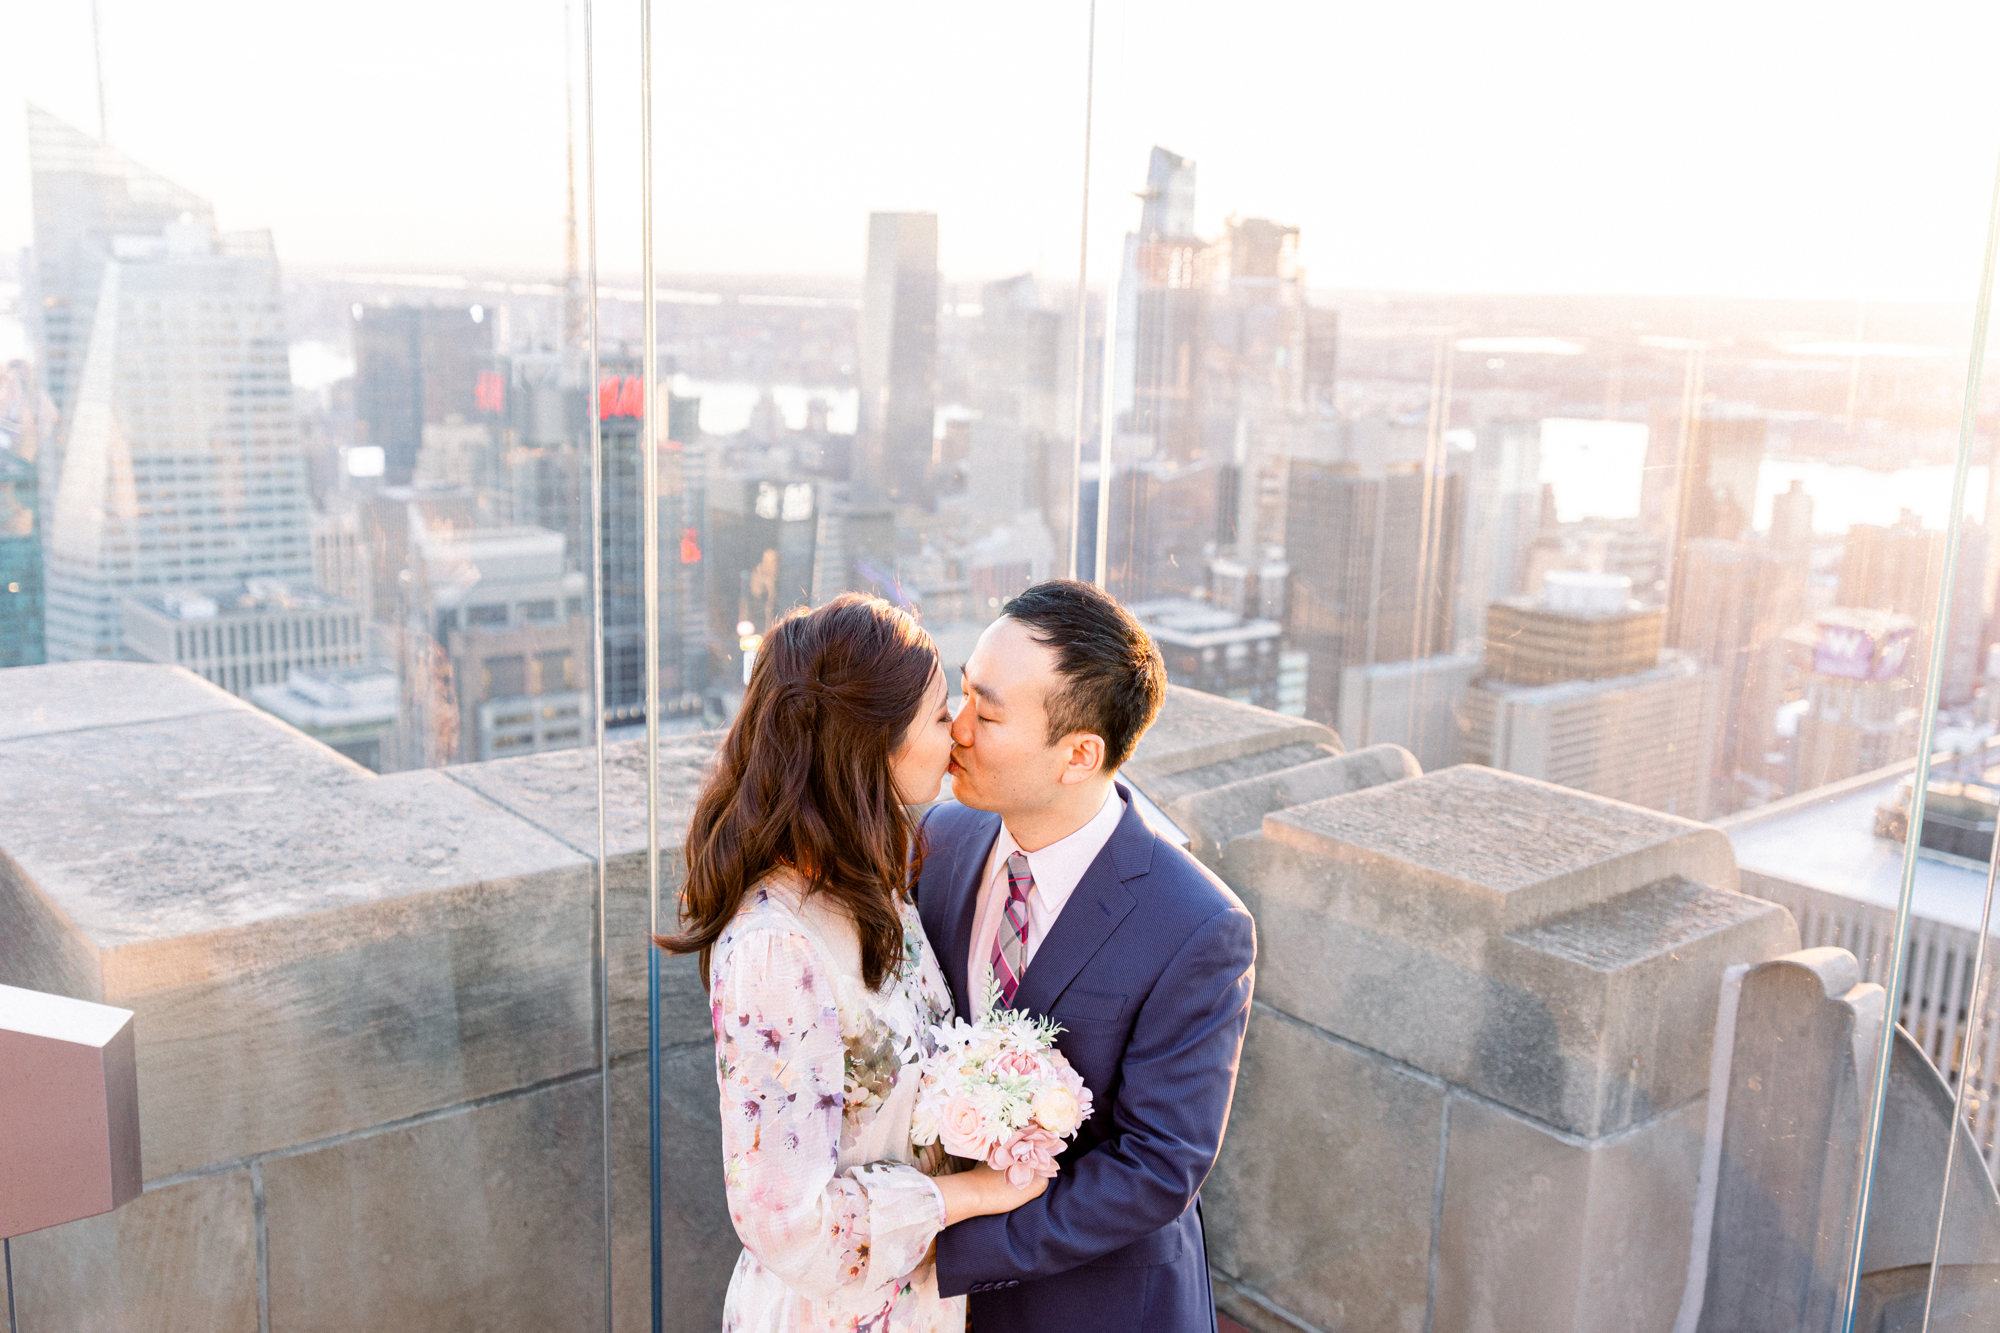 Intimate Top of the Rock Engagement Photography at Sunset in NYC